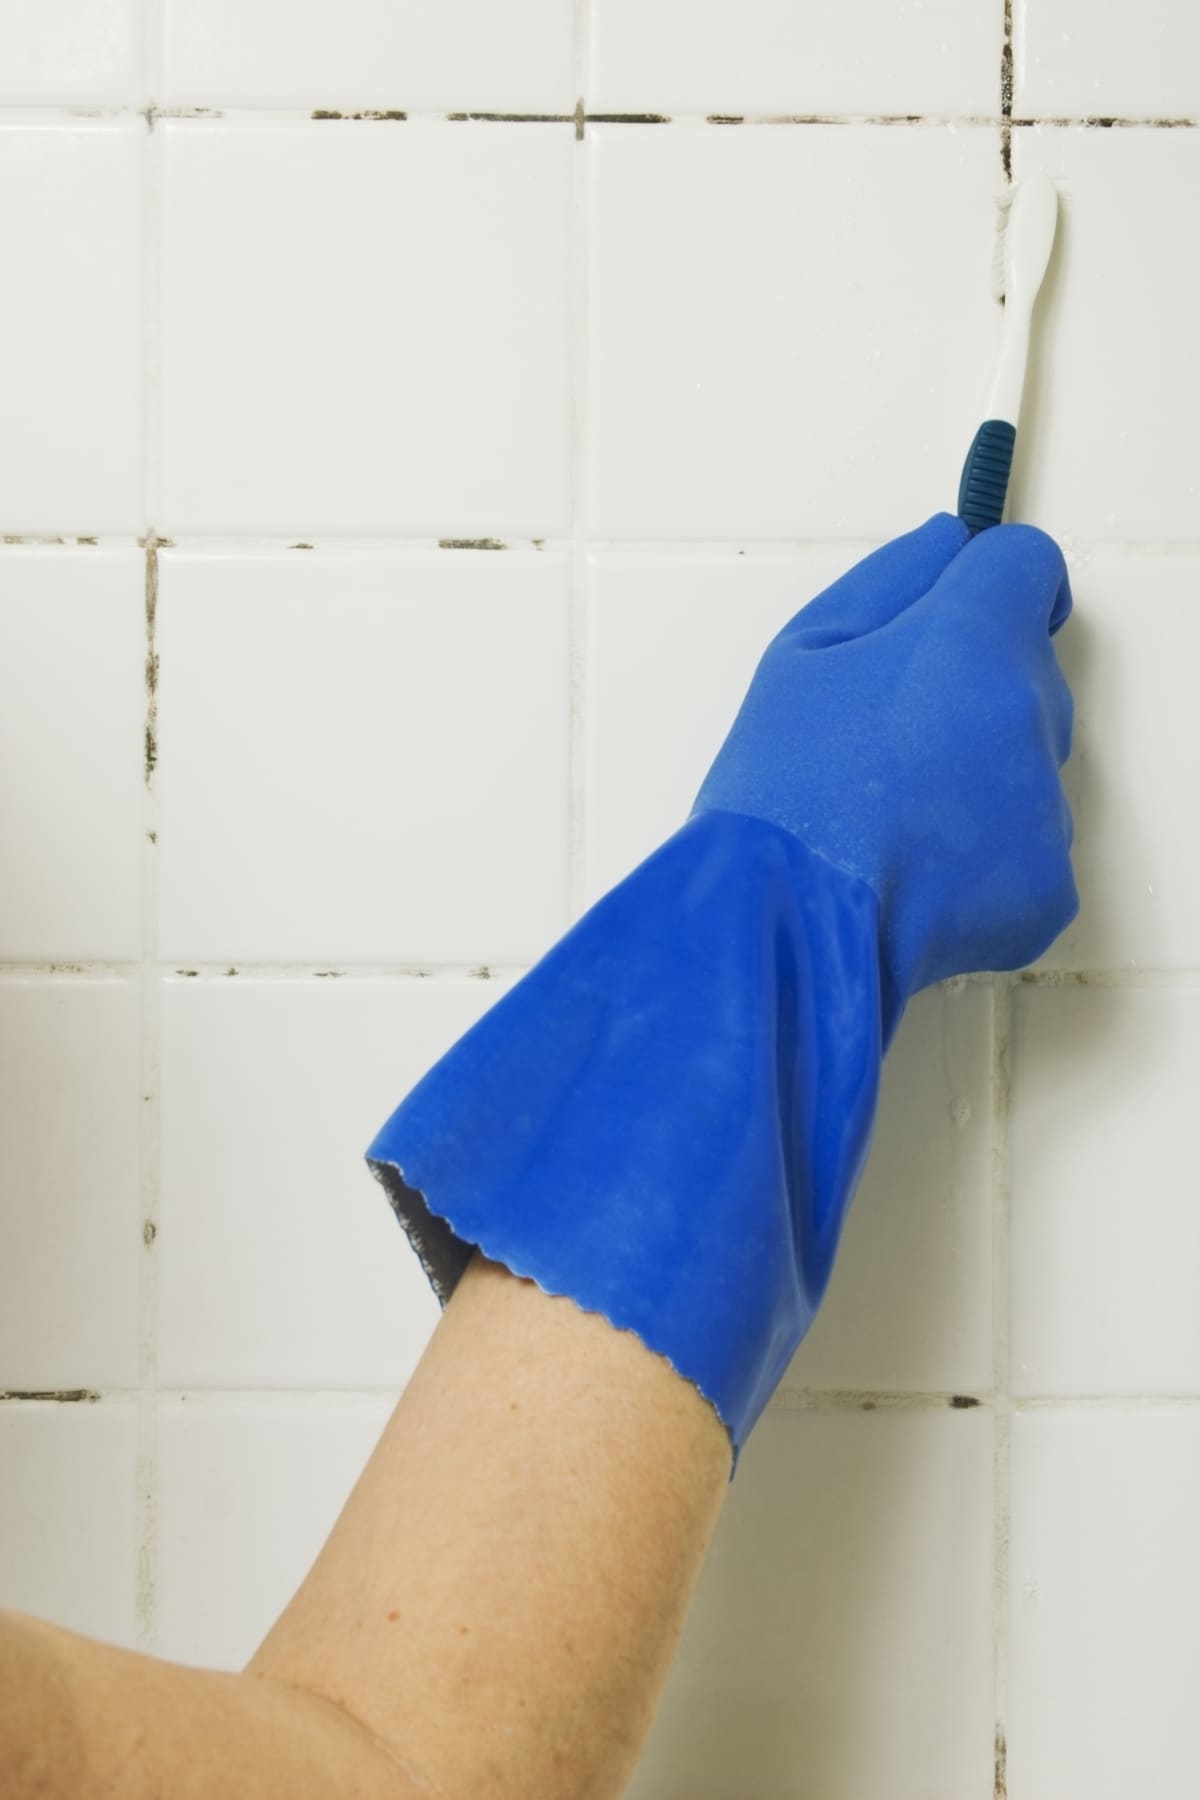 "Cleaning the moldy shower - textured rubber glove, toothbrush,  spray on cleaner and elbow grease."